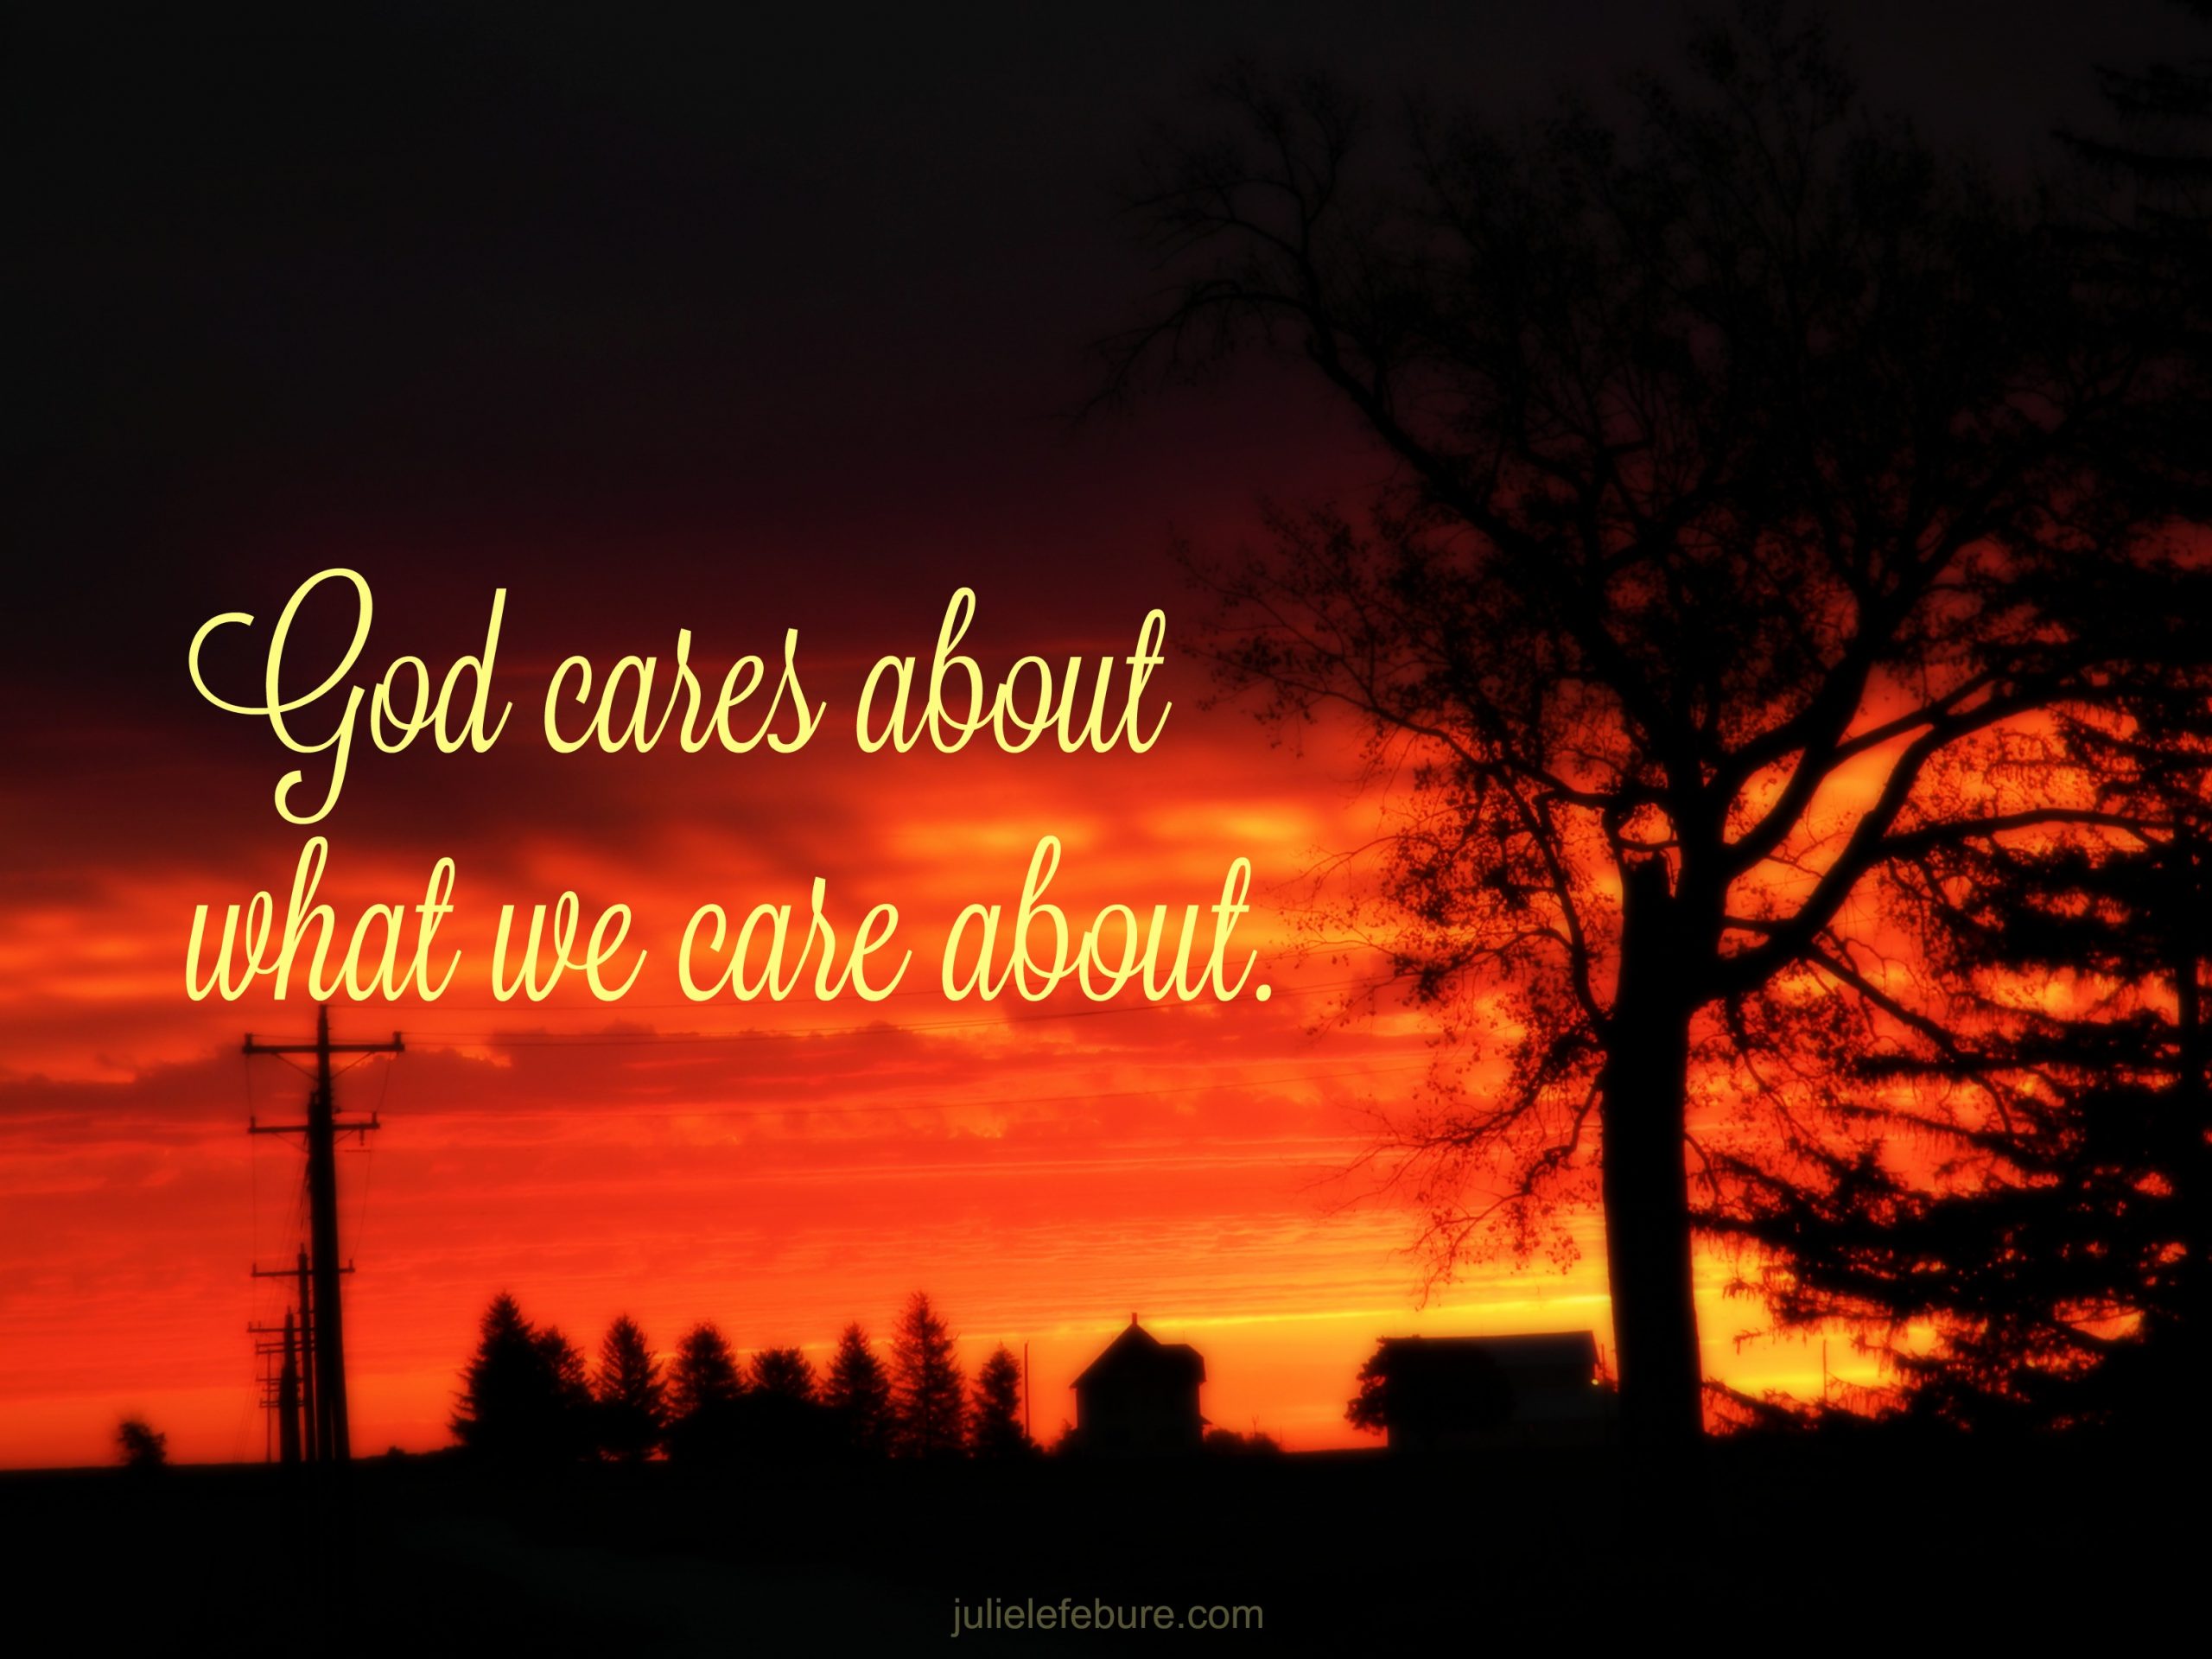 God Cares About What We Care About